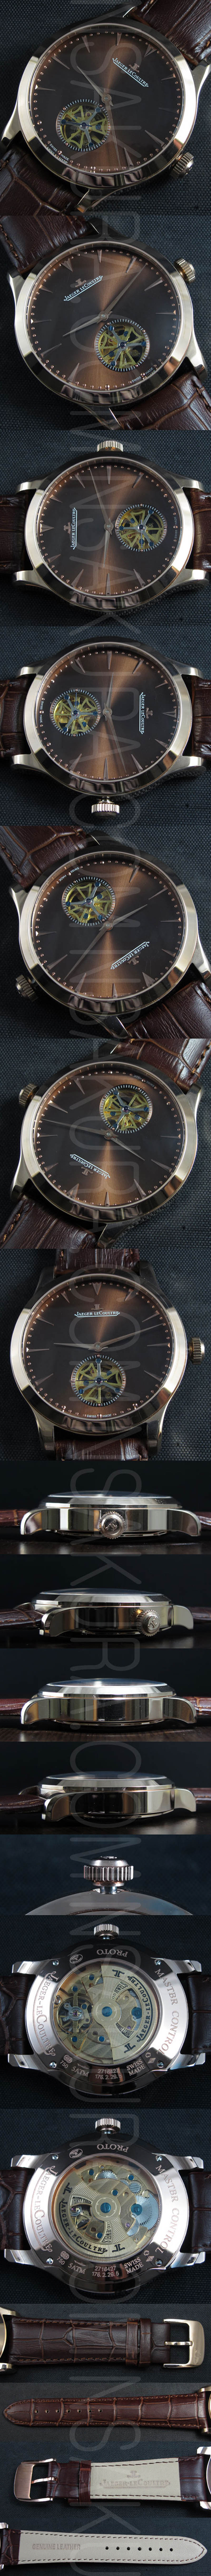 Replica Jaeger-LeCoultre  Watches